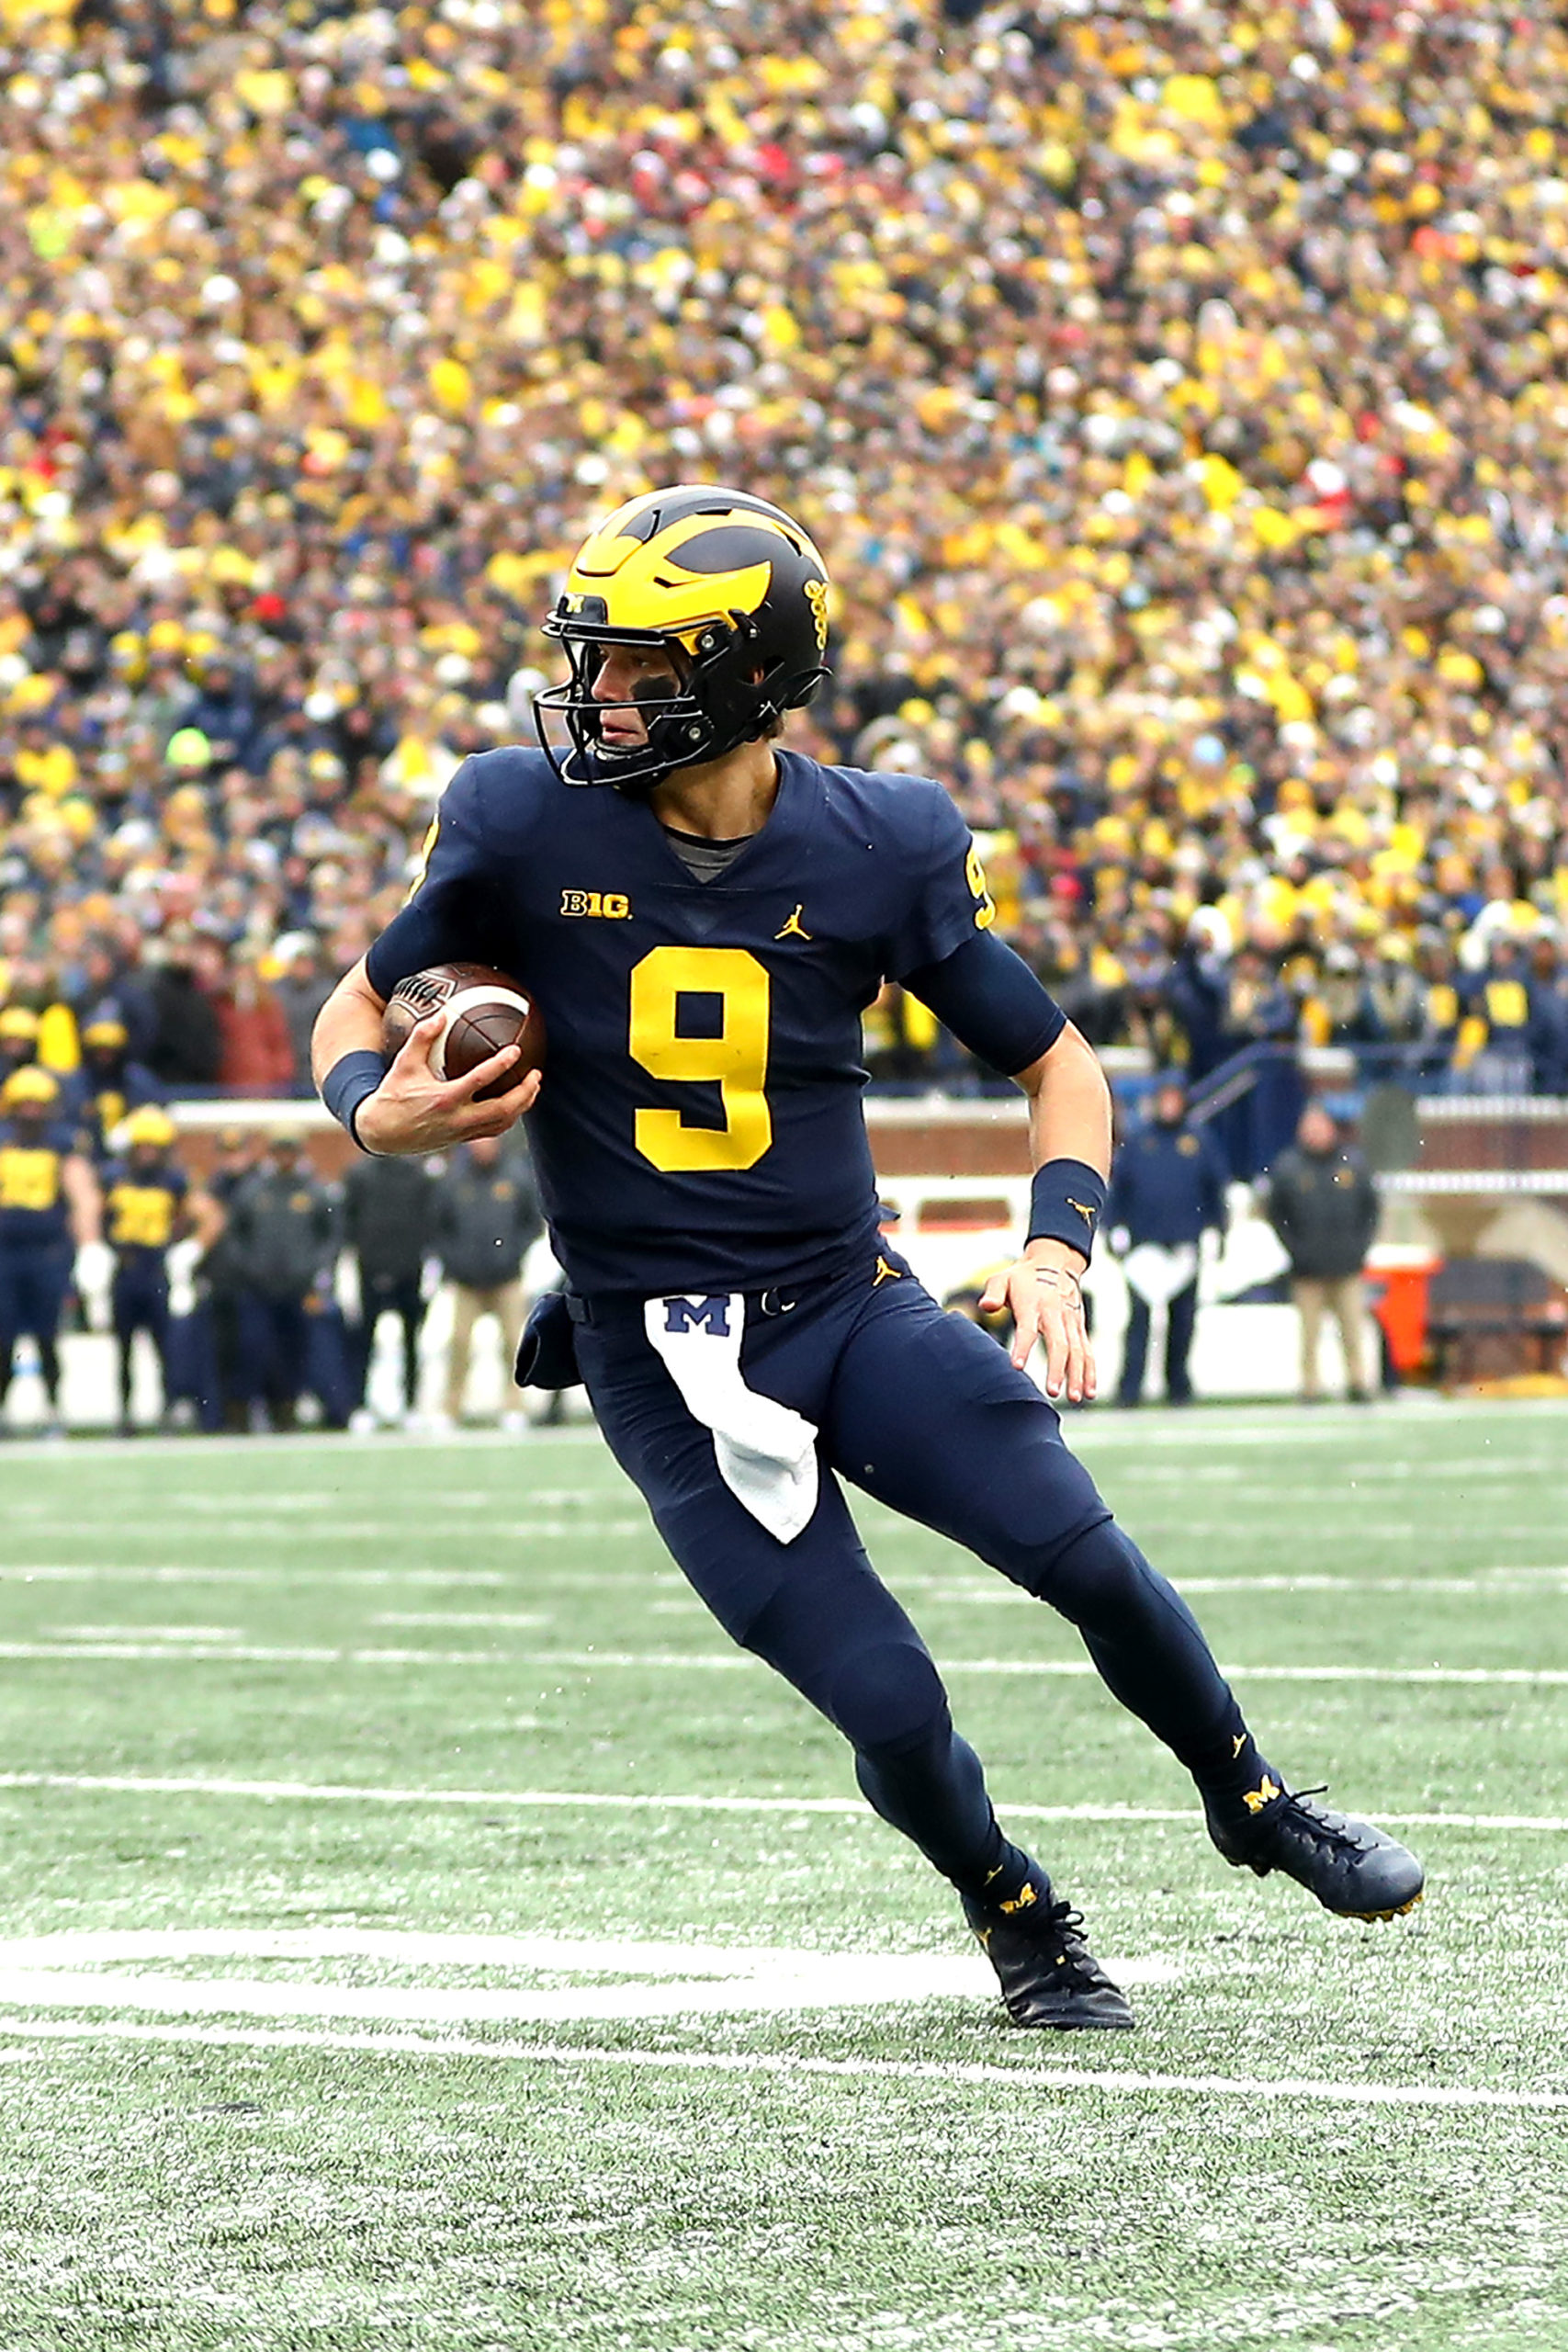 ANN ARBOR, MICHIGAN - NOVEMBER 27: J.J. McCarthy #9 of the Michigan Wolverines carries the ball against the Ohio State Buckeyes in the third quarter of the game at Michigan Stadium on November 27, 2021 in Ann Arbor, Michigan. (Photo by Mike Mulholland/Getty Images)